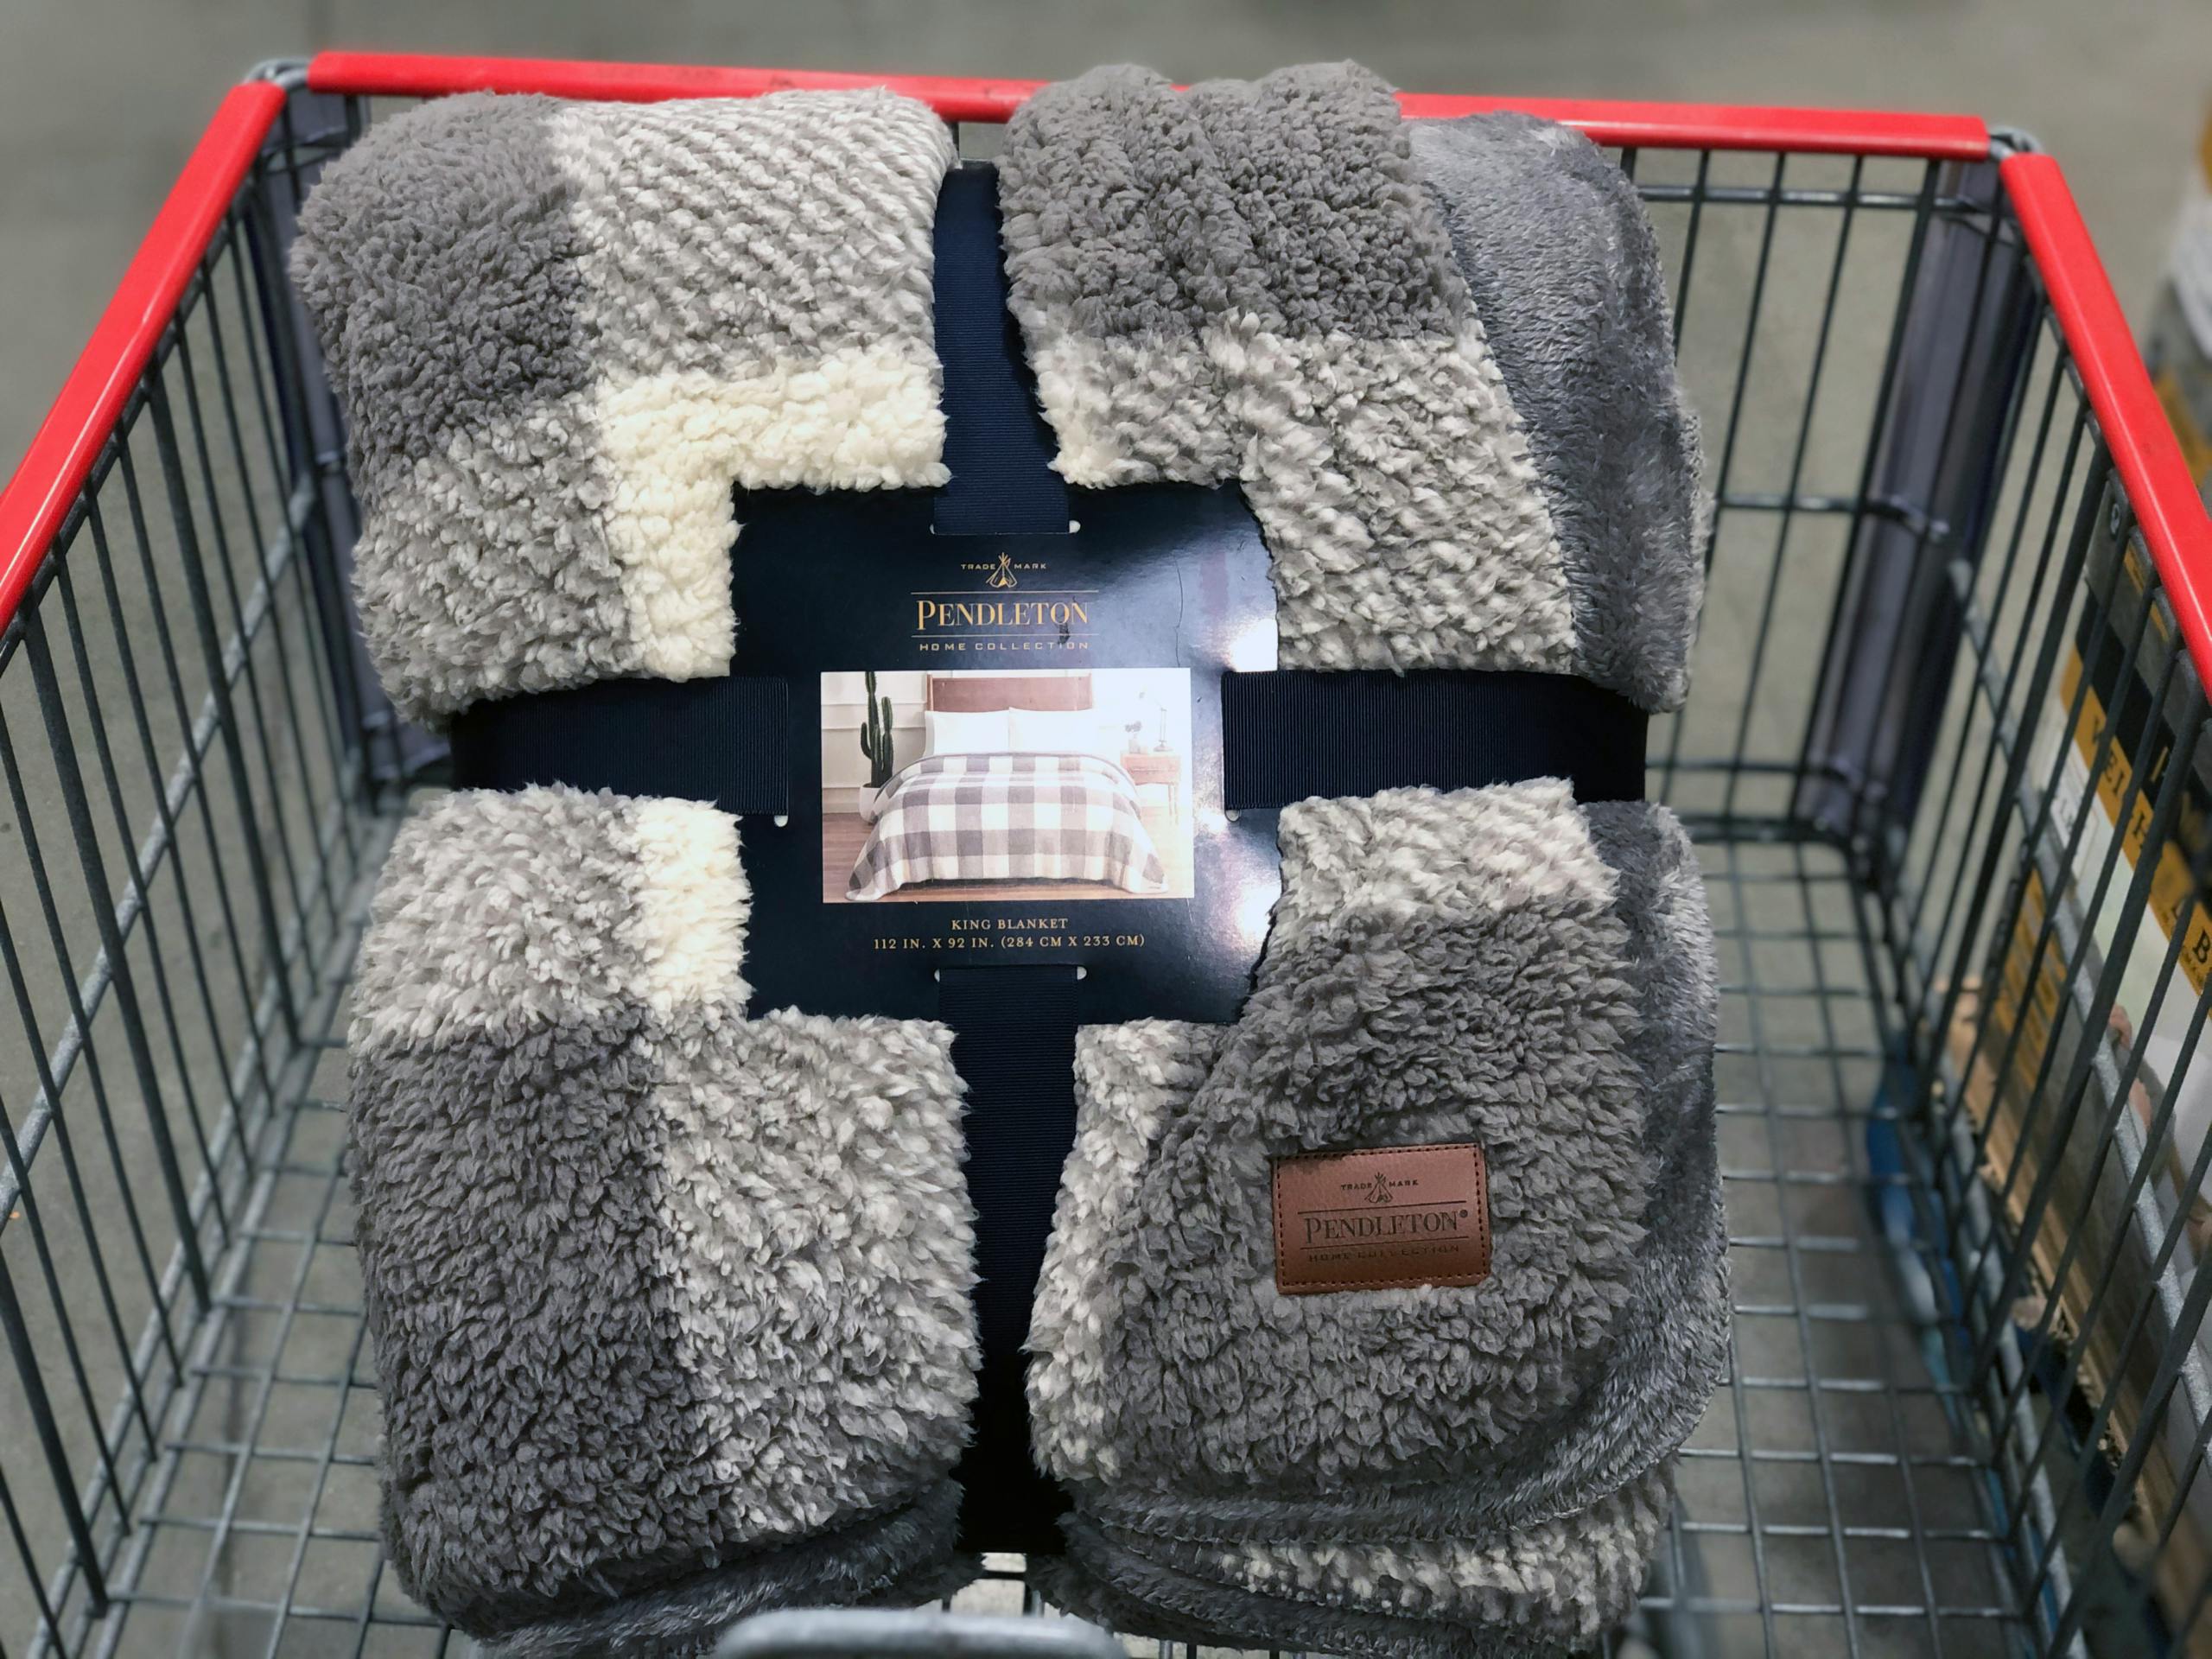 Costco Is Selling Pendleton Blankets for a Steal - Plush & Weighted